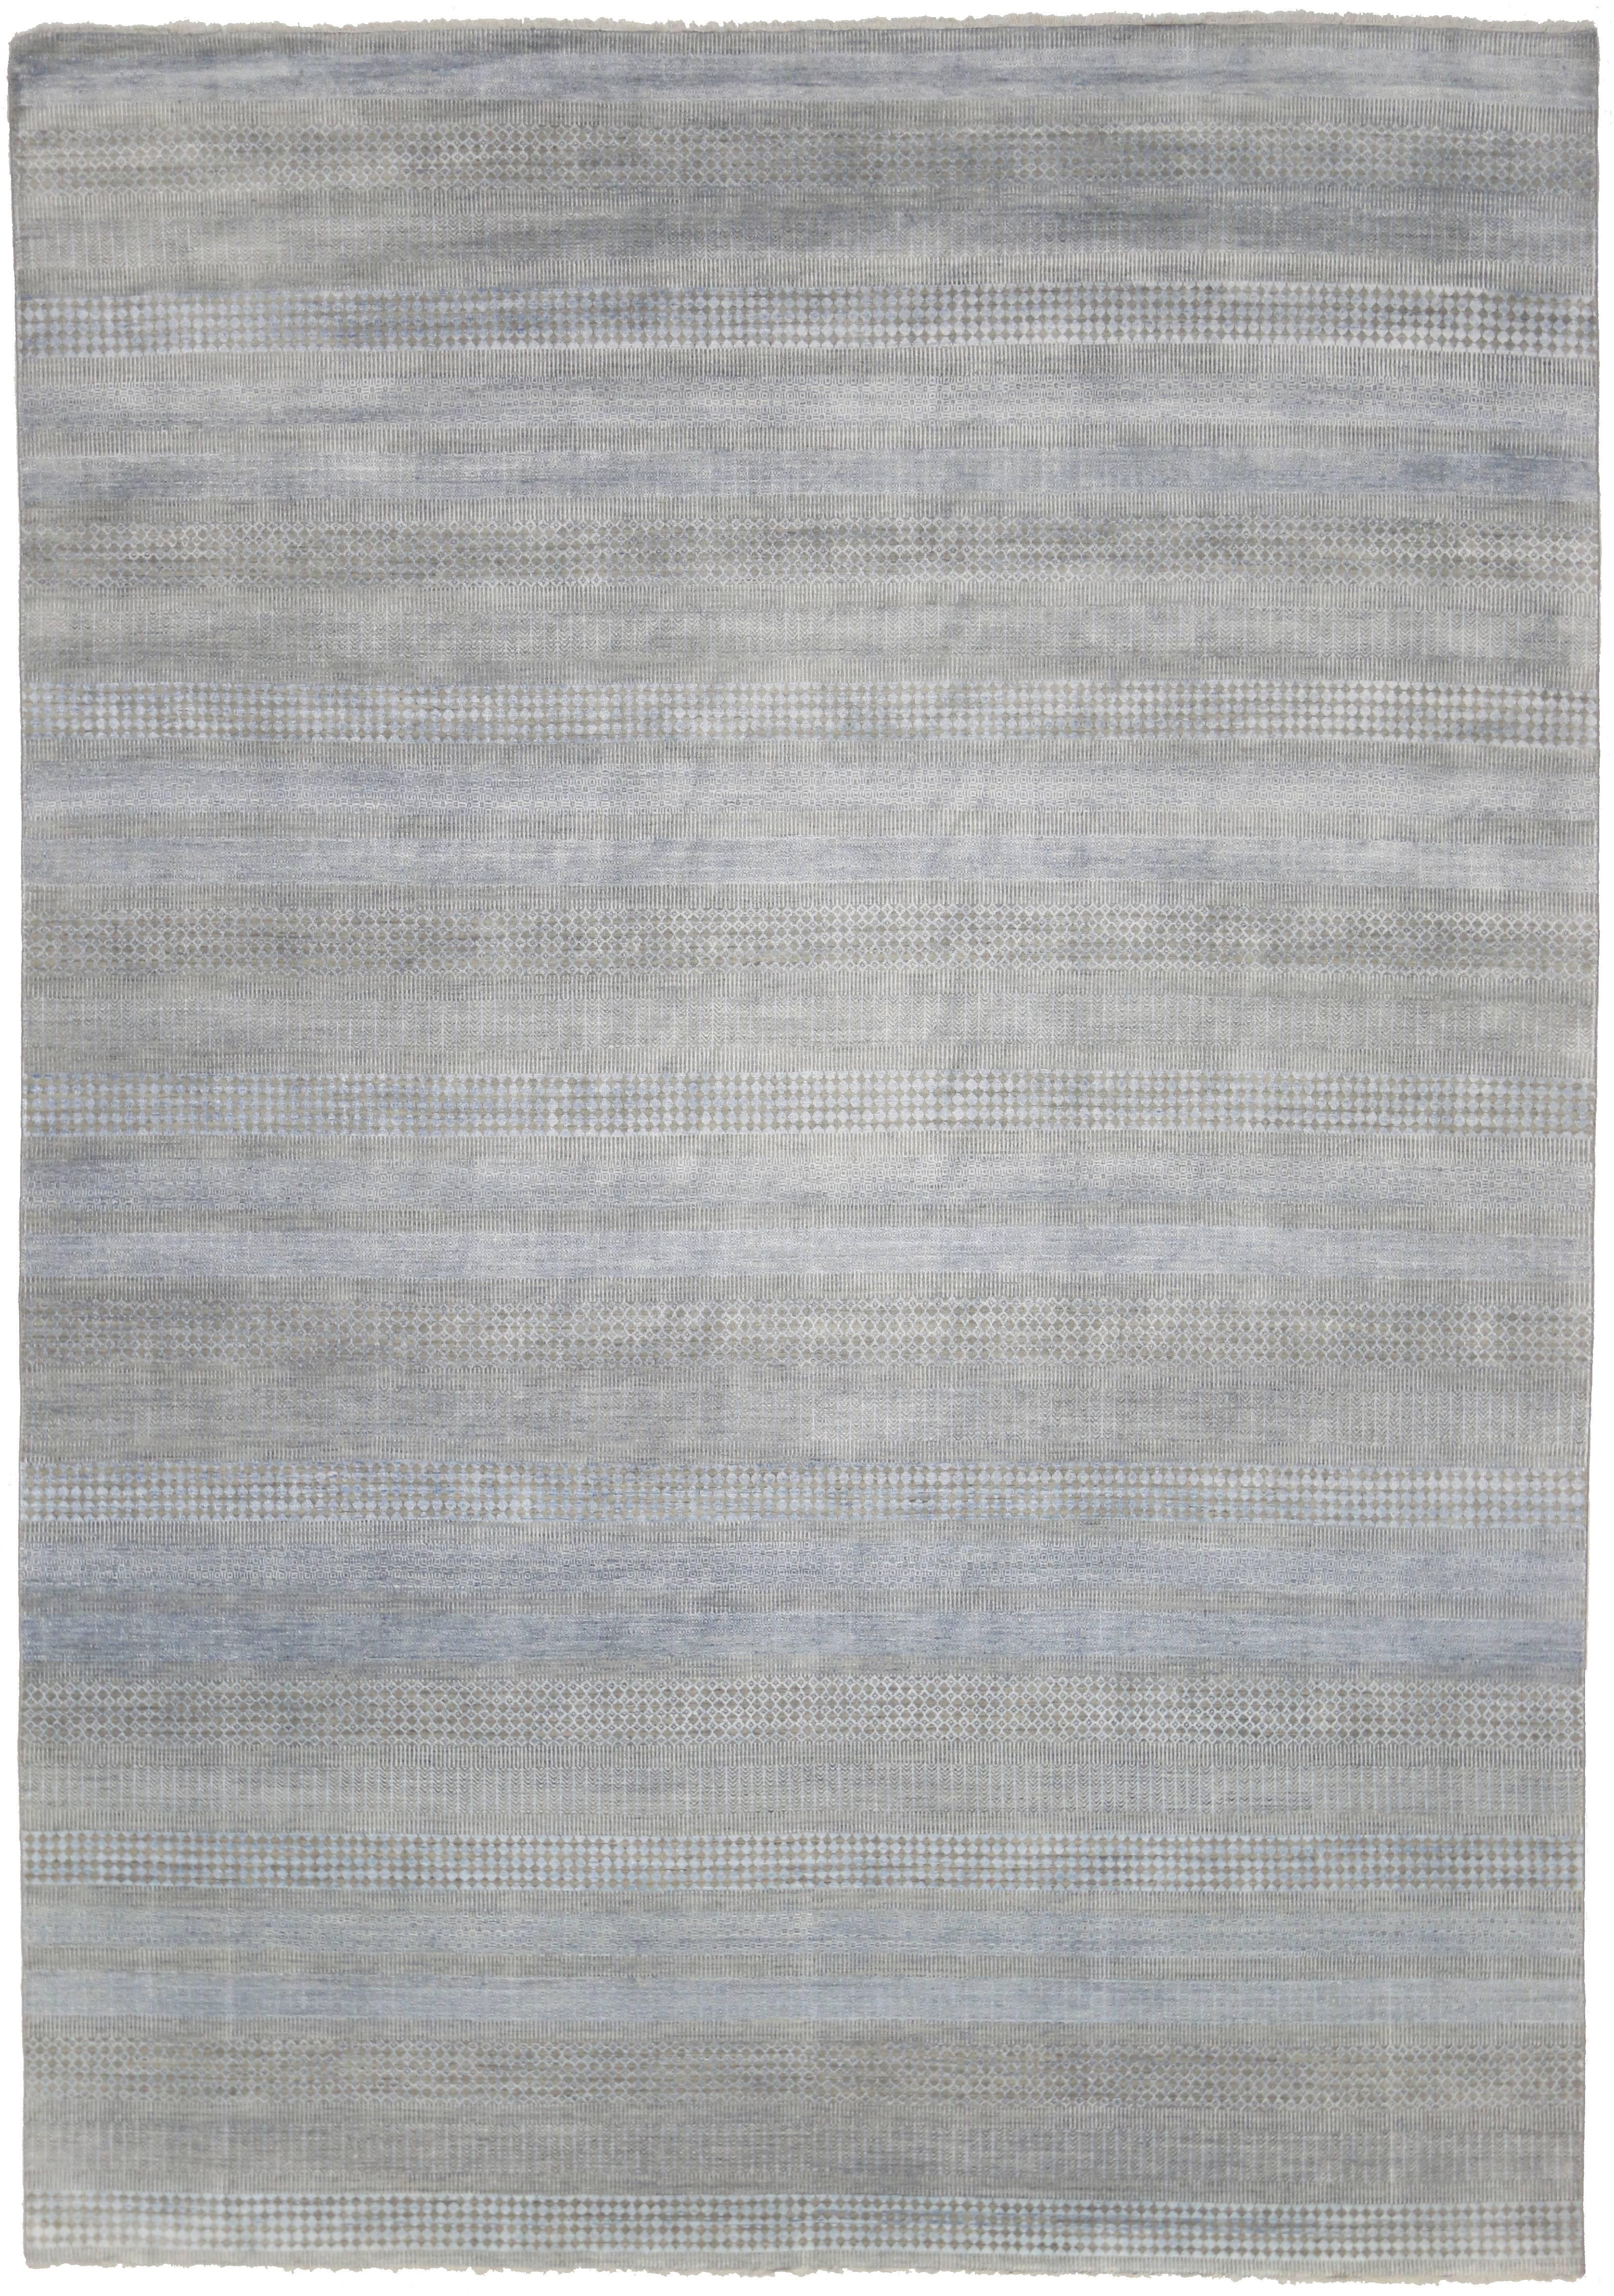 Wool New Modern Transitional Grasscloth Area Rug, Light Gray and Light Blue Area Rug